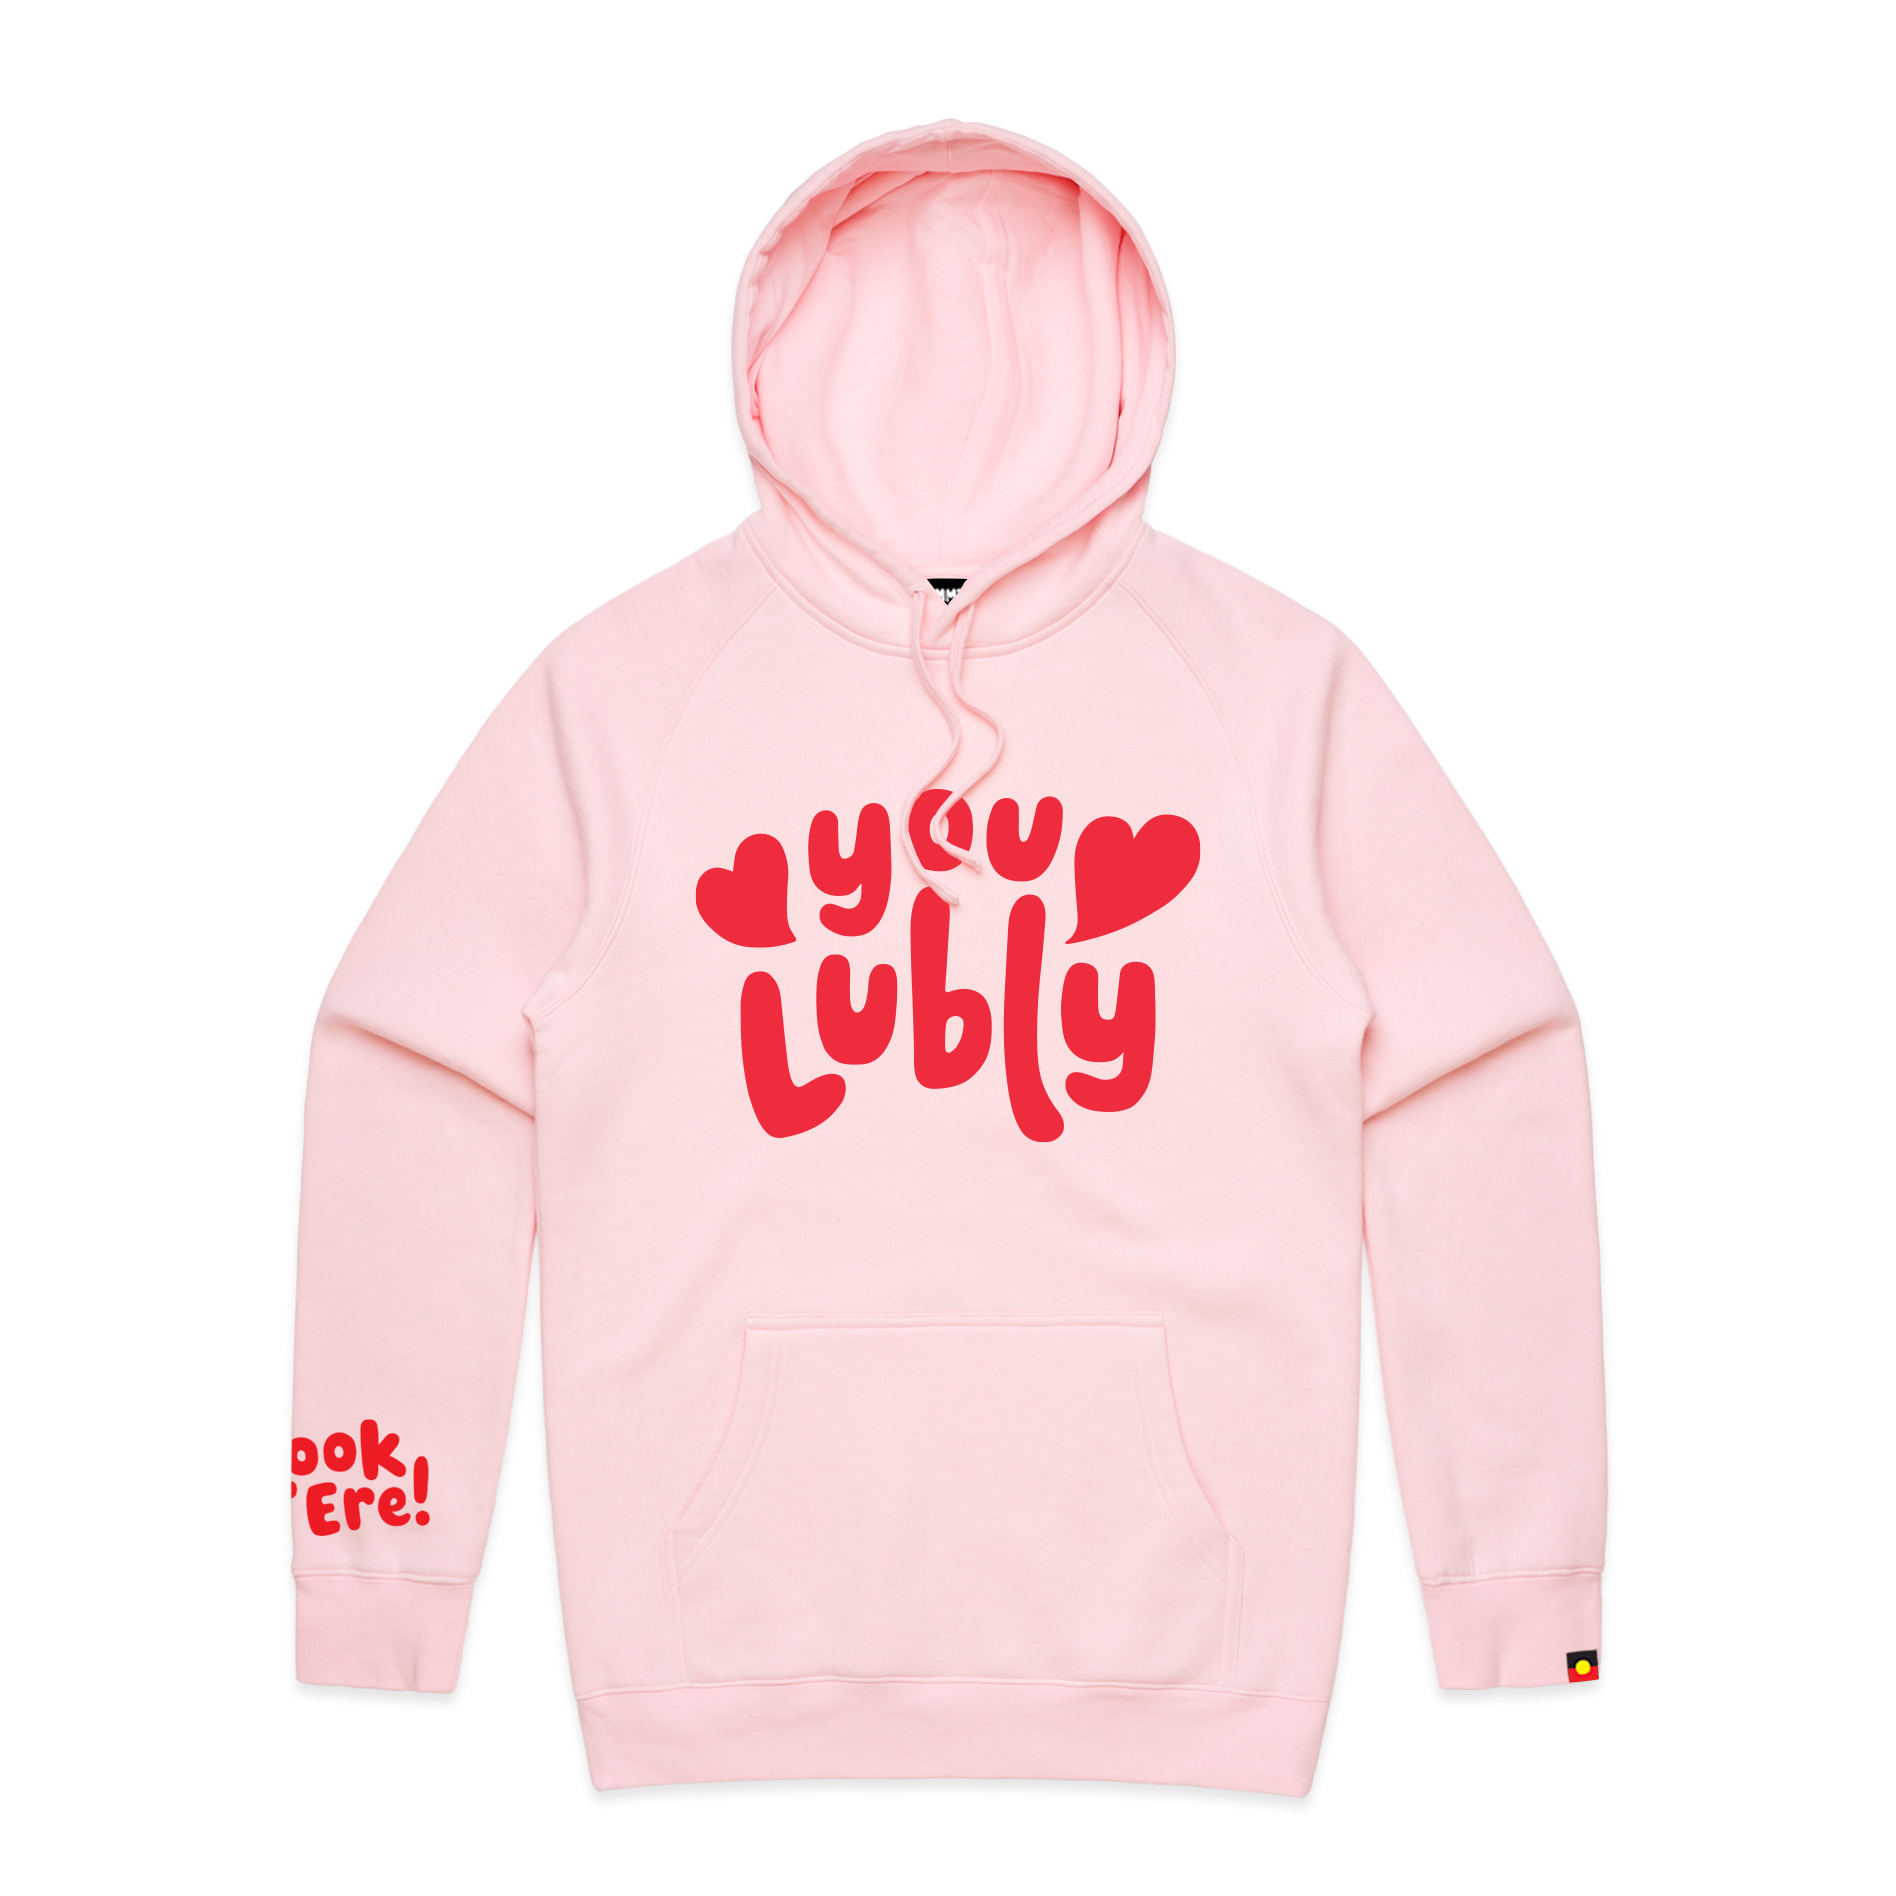 Lubly hoodie